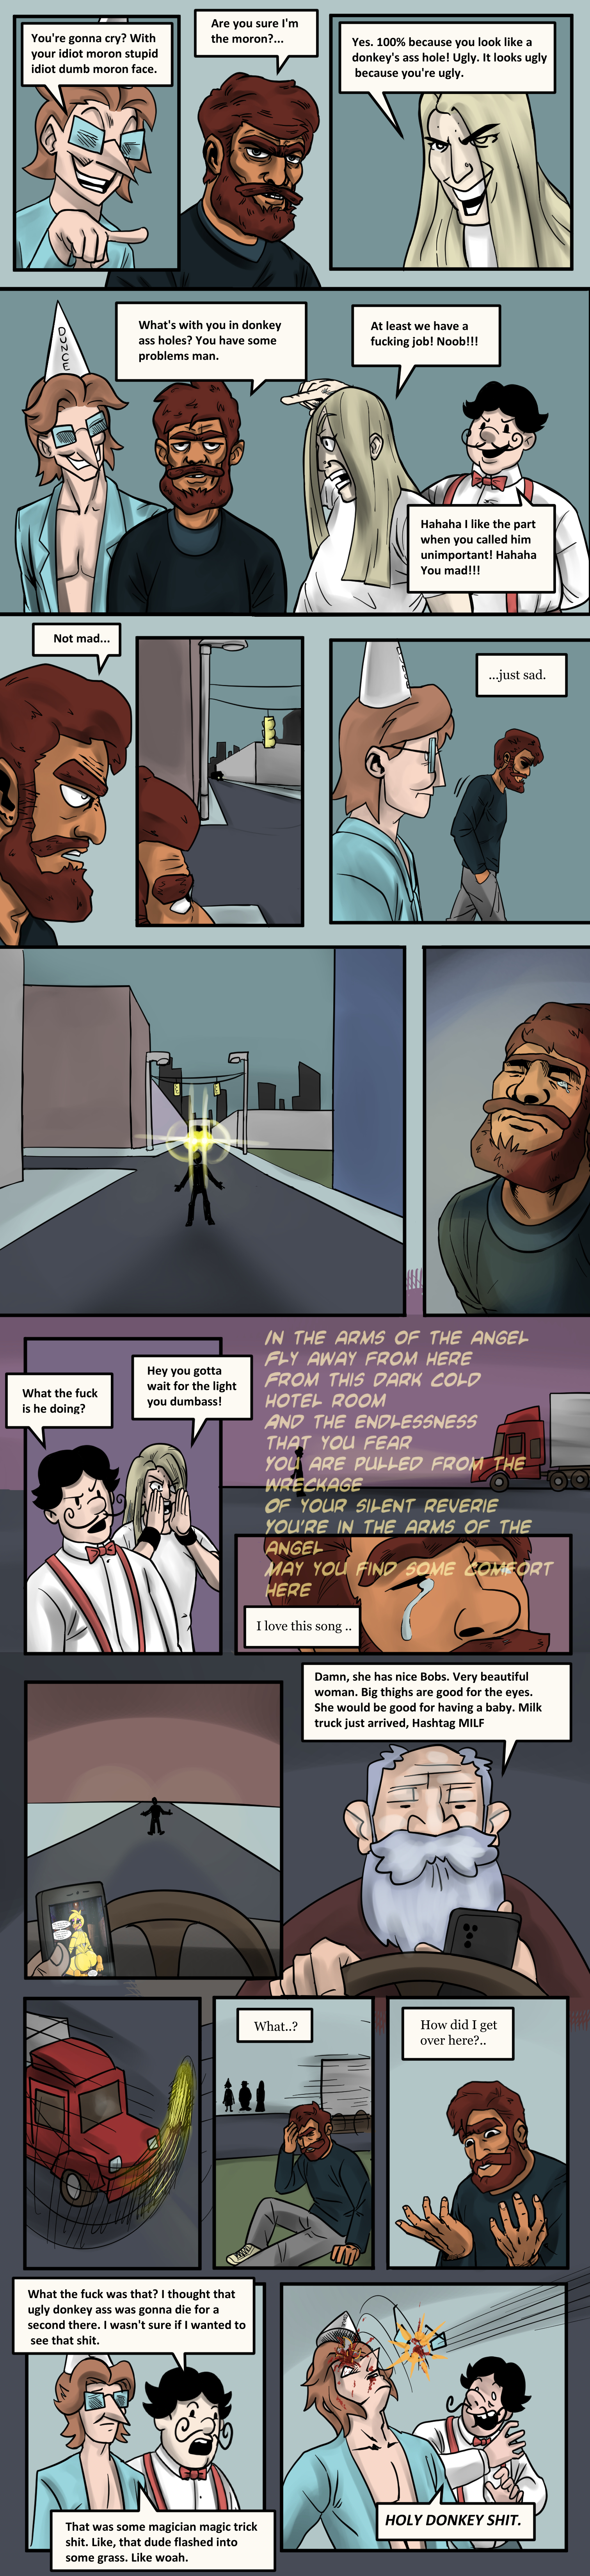 ch26/pg3.jpg. If you're seeing this, enable images. Or, perhaps we have a website issue. Try refreshing, if unsuccessful email c@commodorian.org with a detailed description of how you got here.